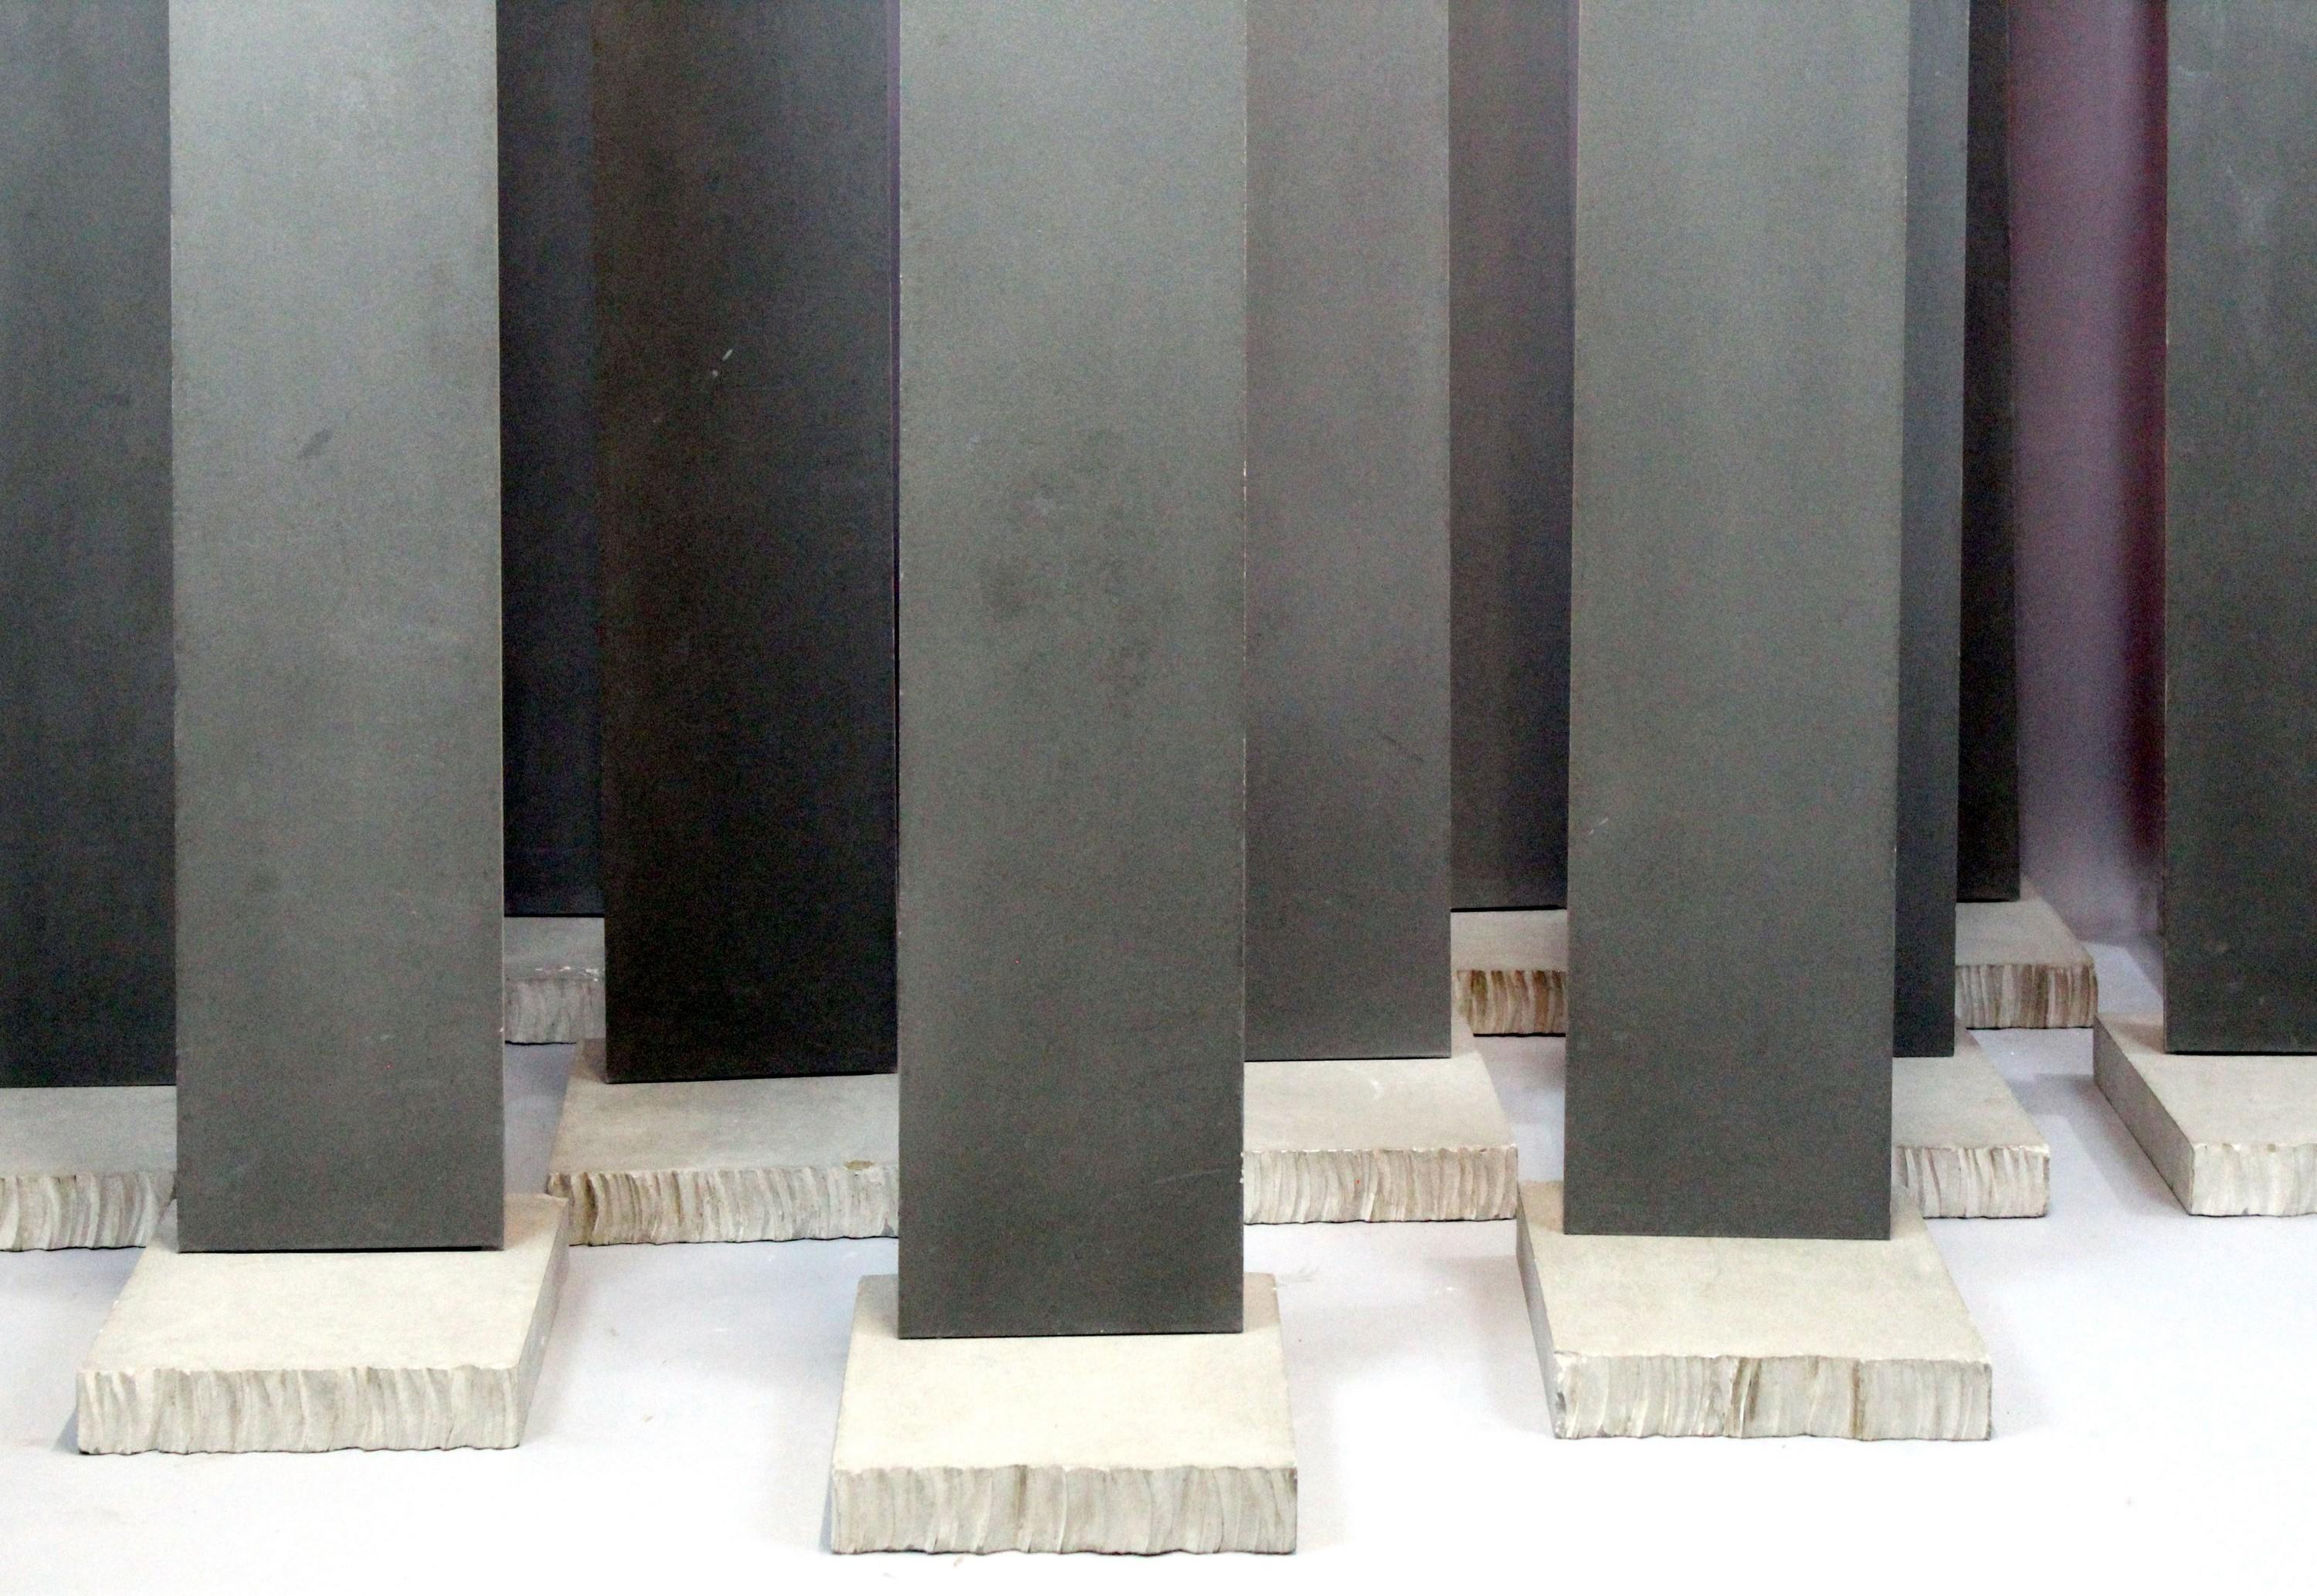 Installation composed of 14 steel blades and painted metal, on cut cement bases This installation was created for the Venice Biennale in 1988, for the Cure exhibition, by Alfredo Pirri The blades, all identical, can be arranged according to a